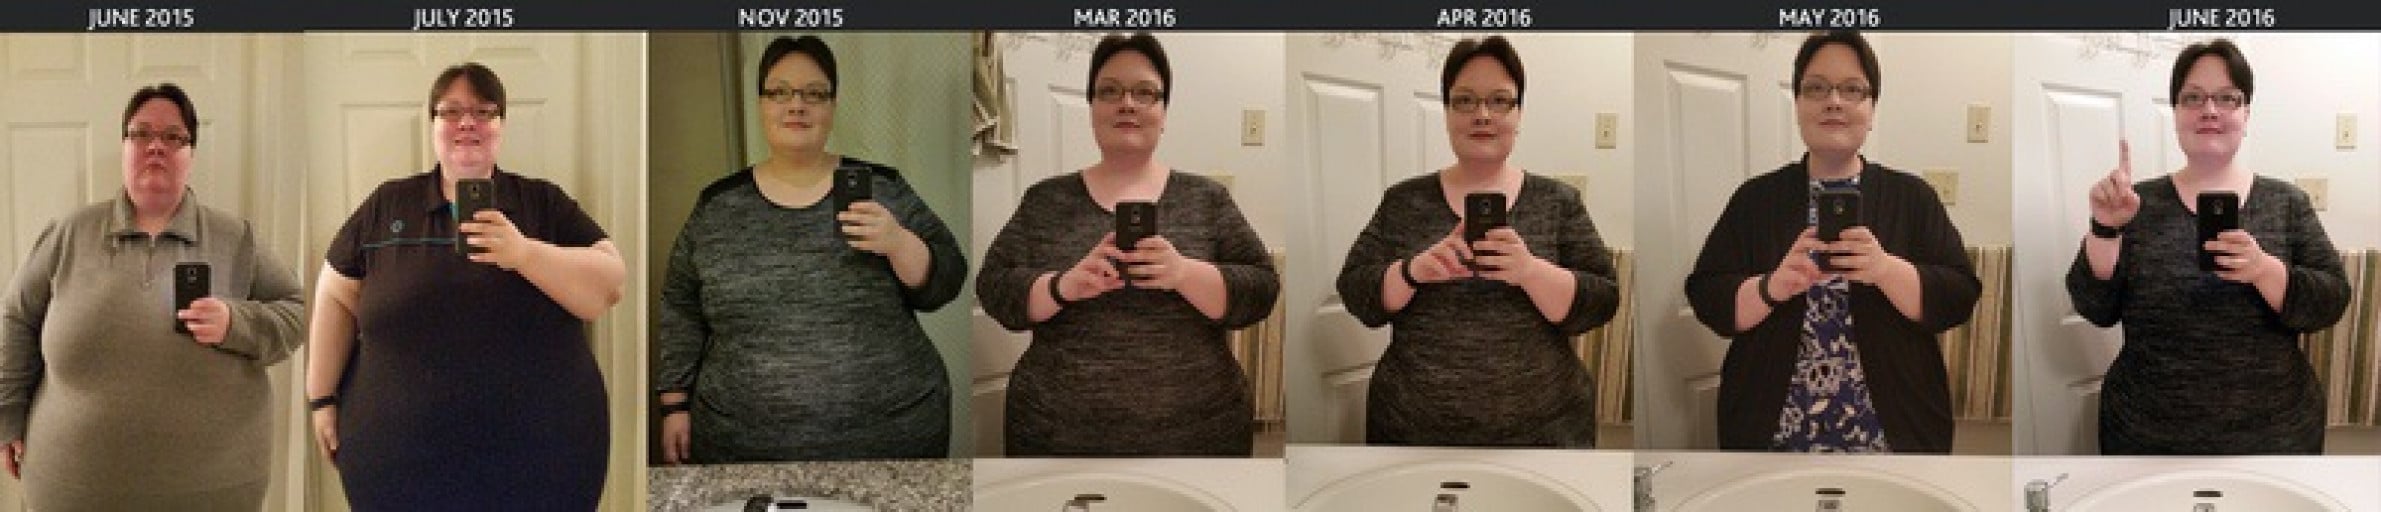 173 lbs Fat Loss Before and After 5 foot 3 Female 495 lbs to 322 lbs